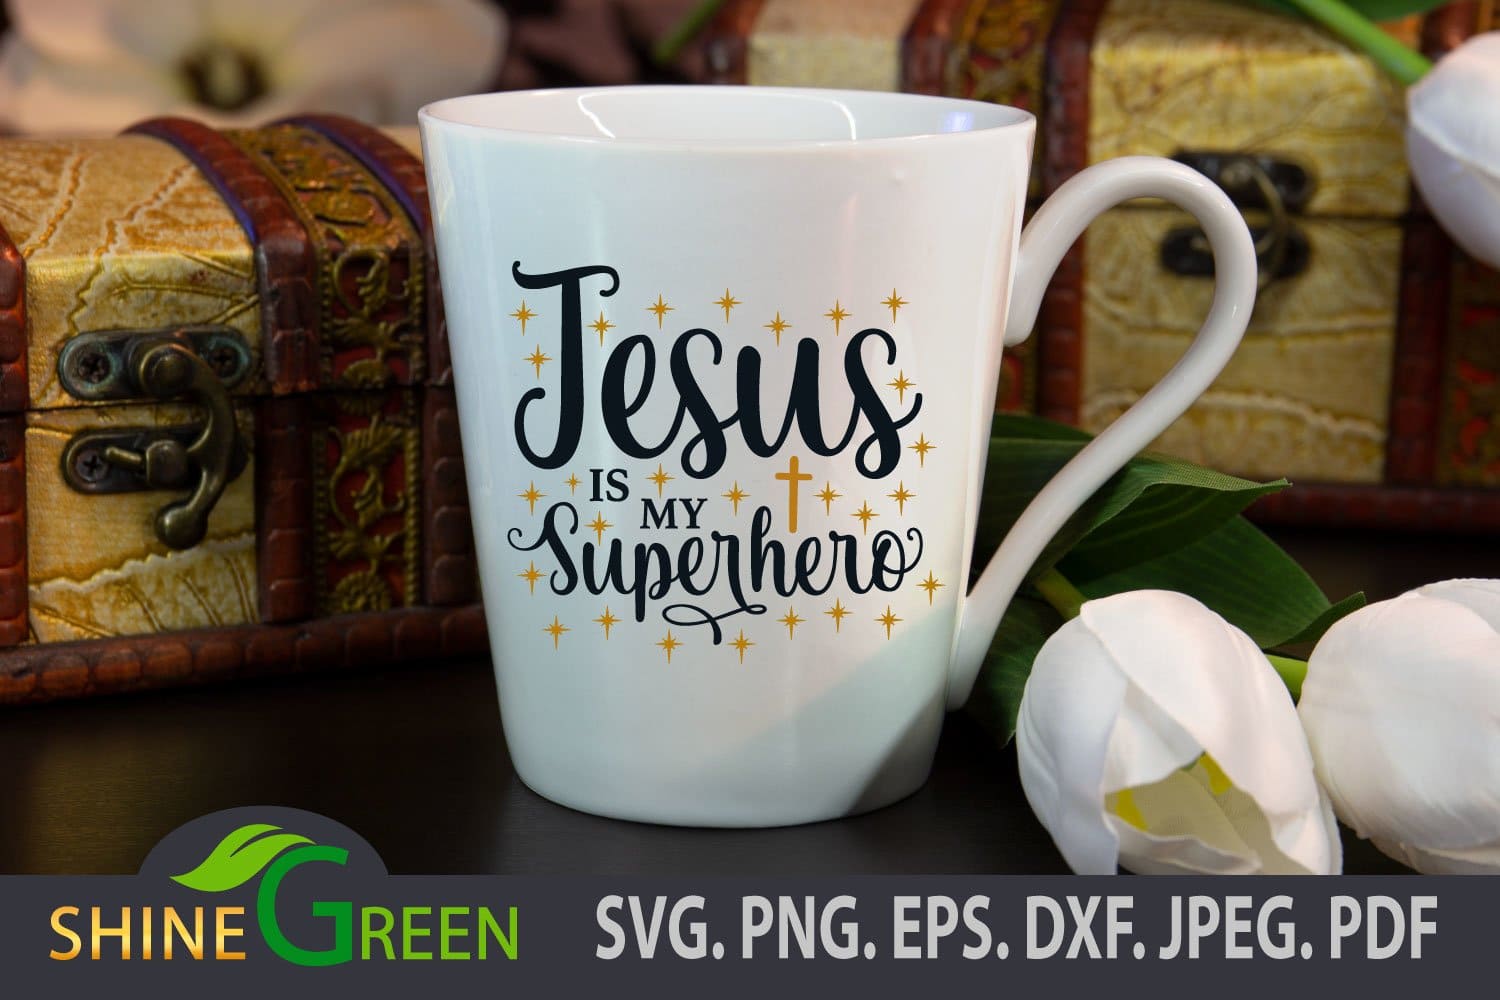 "Jesus is my superhero" - the inscription on a white cup.